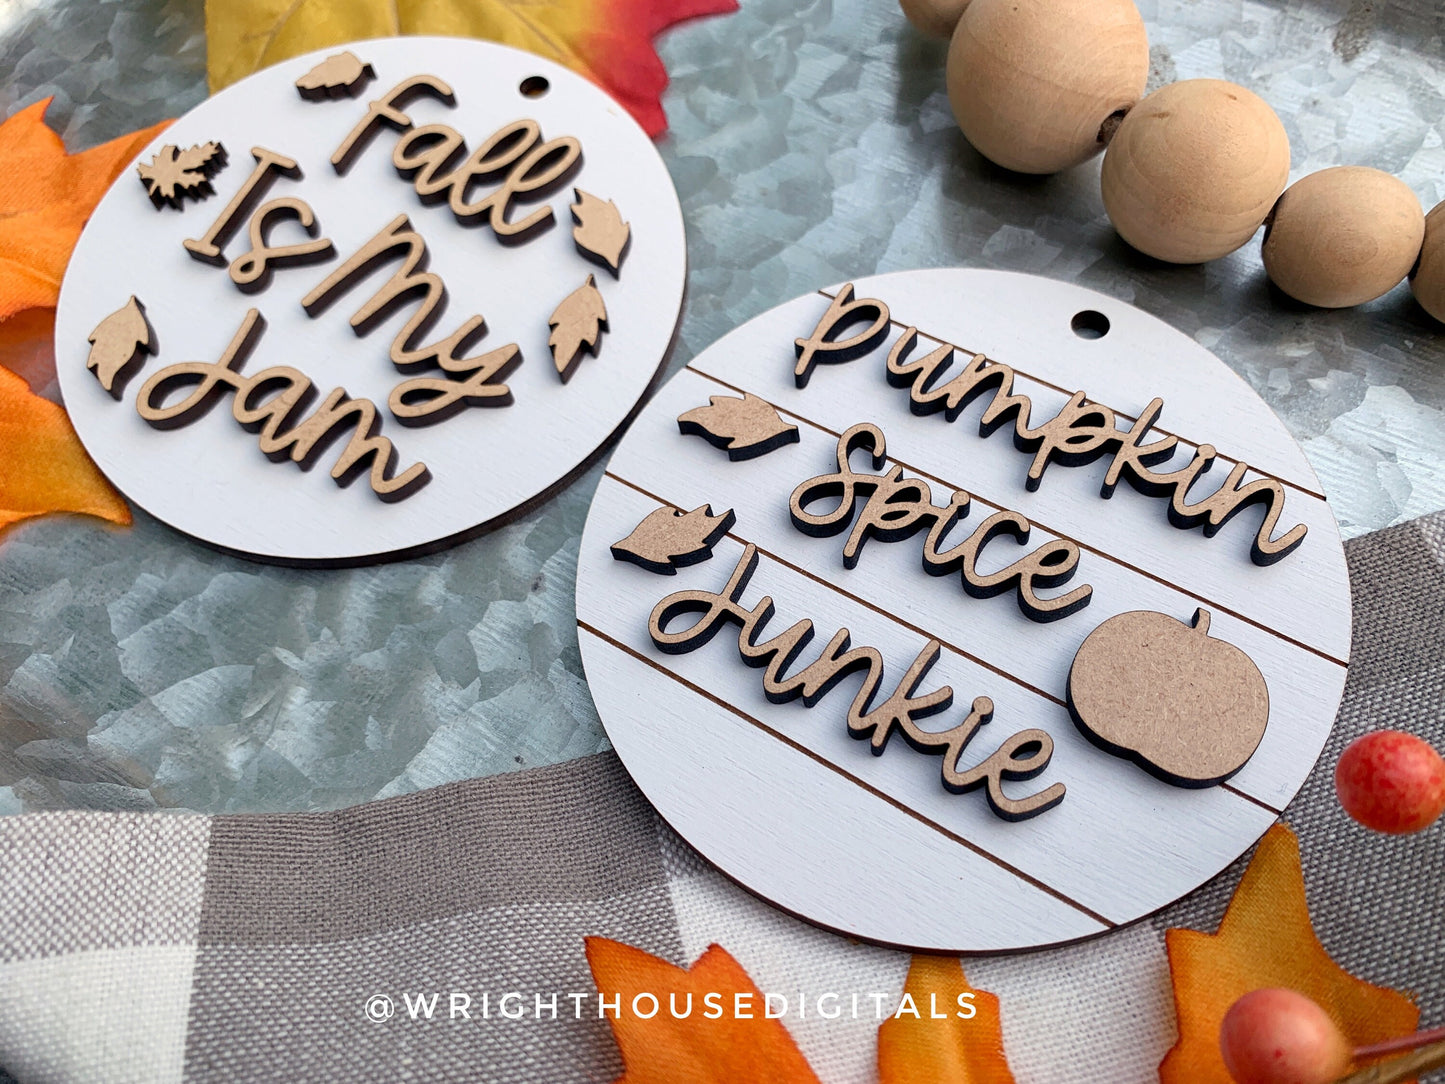 Fall is My Jam Pumpkin Spice Junkie Fall Traditions Mini Ornament Set - Files for Cutting Machines and Glowforge Lasers - Digital SVG File